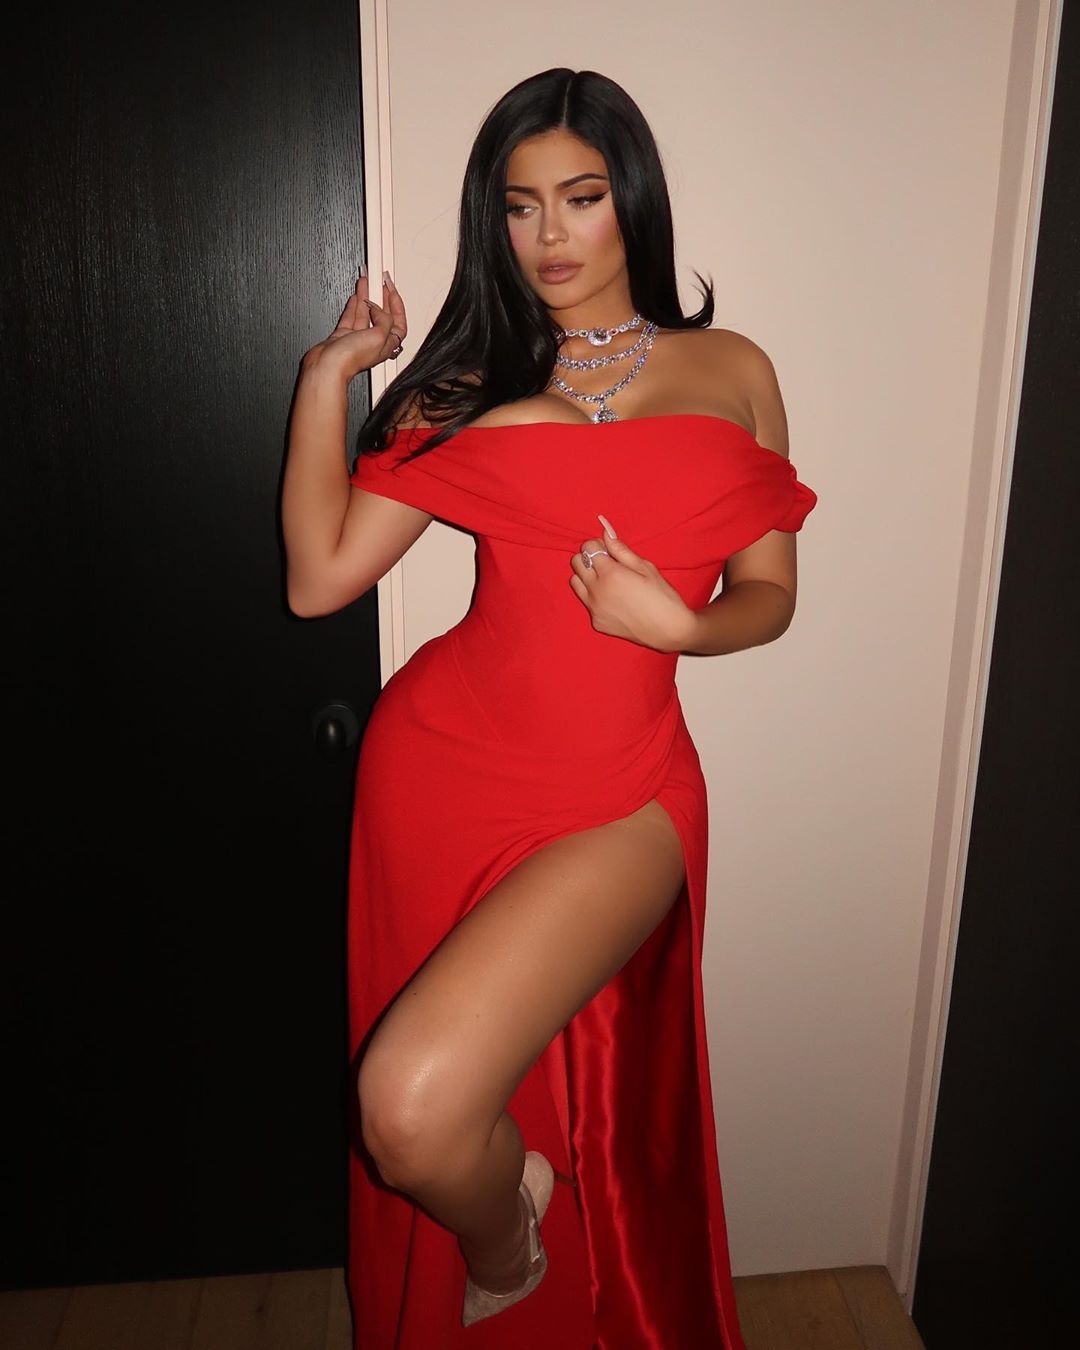 Kylie Jenner posing in red gown